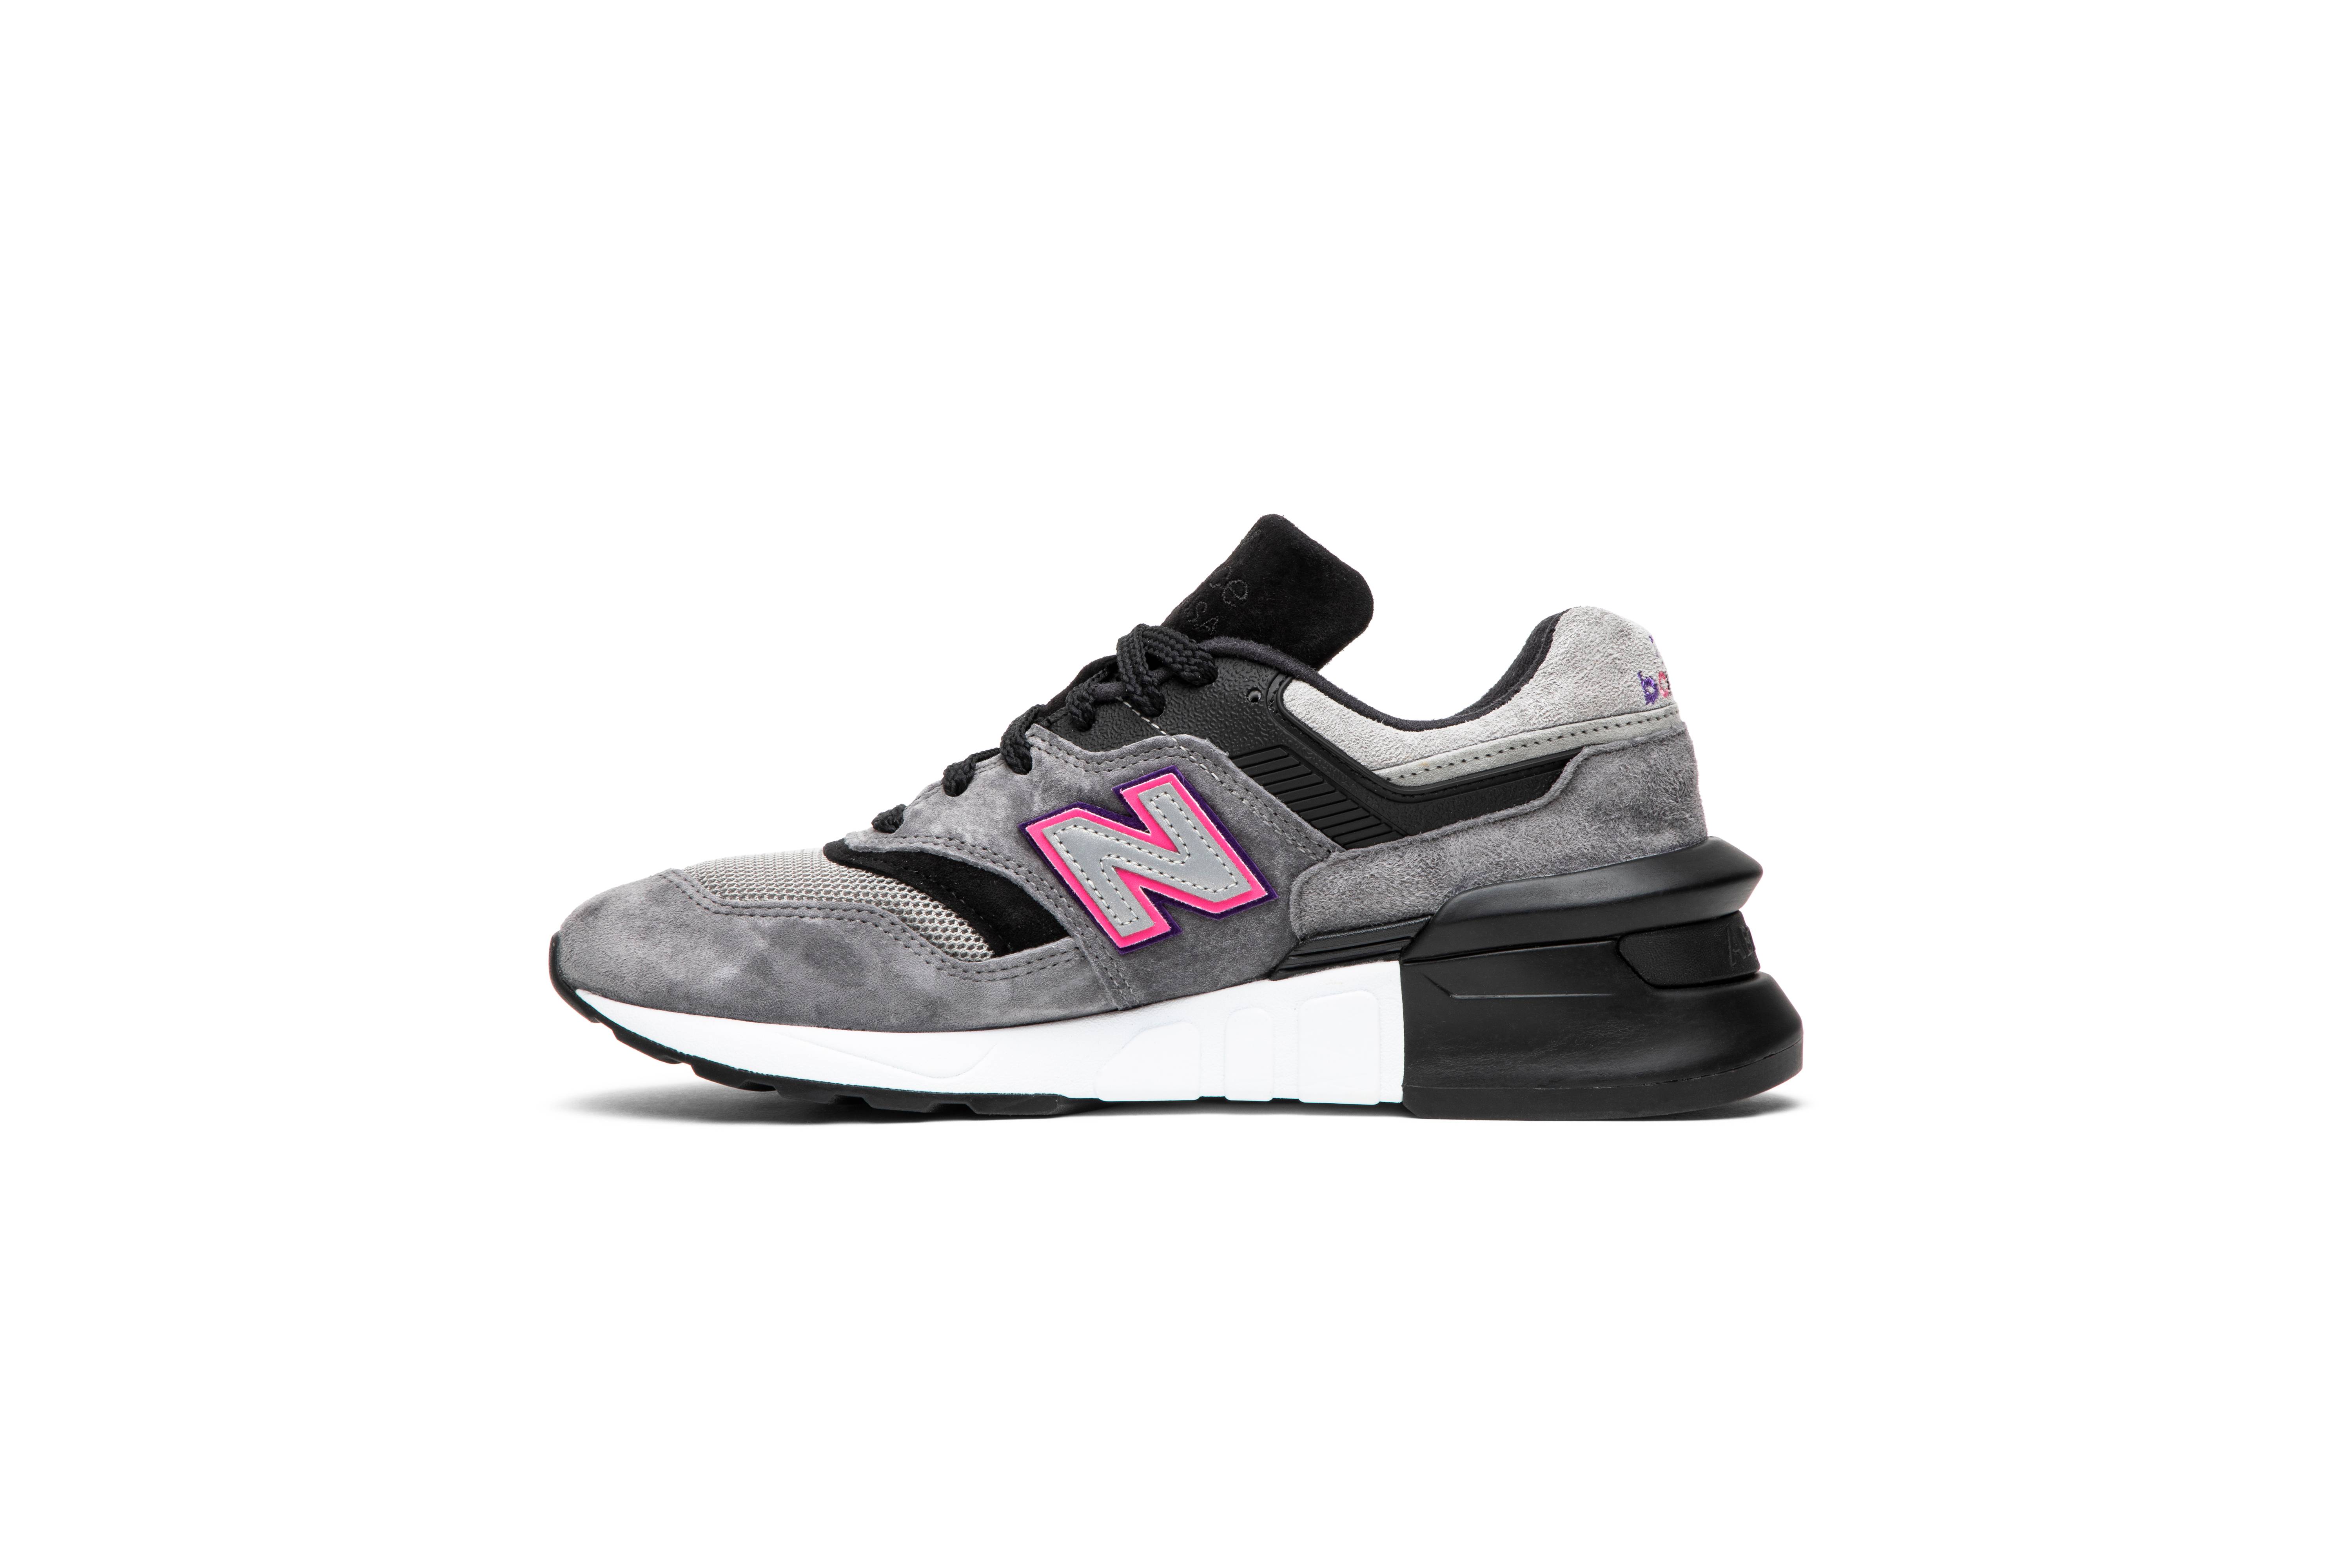 KITH x United Arrows and Sons x New Balance 997S Fusion 'Grey Pink' M997SKH